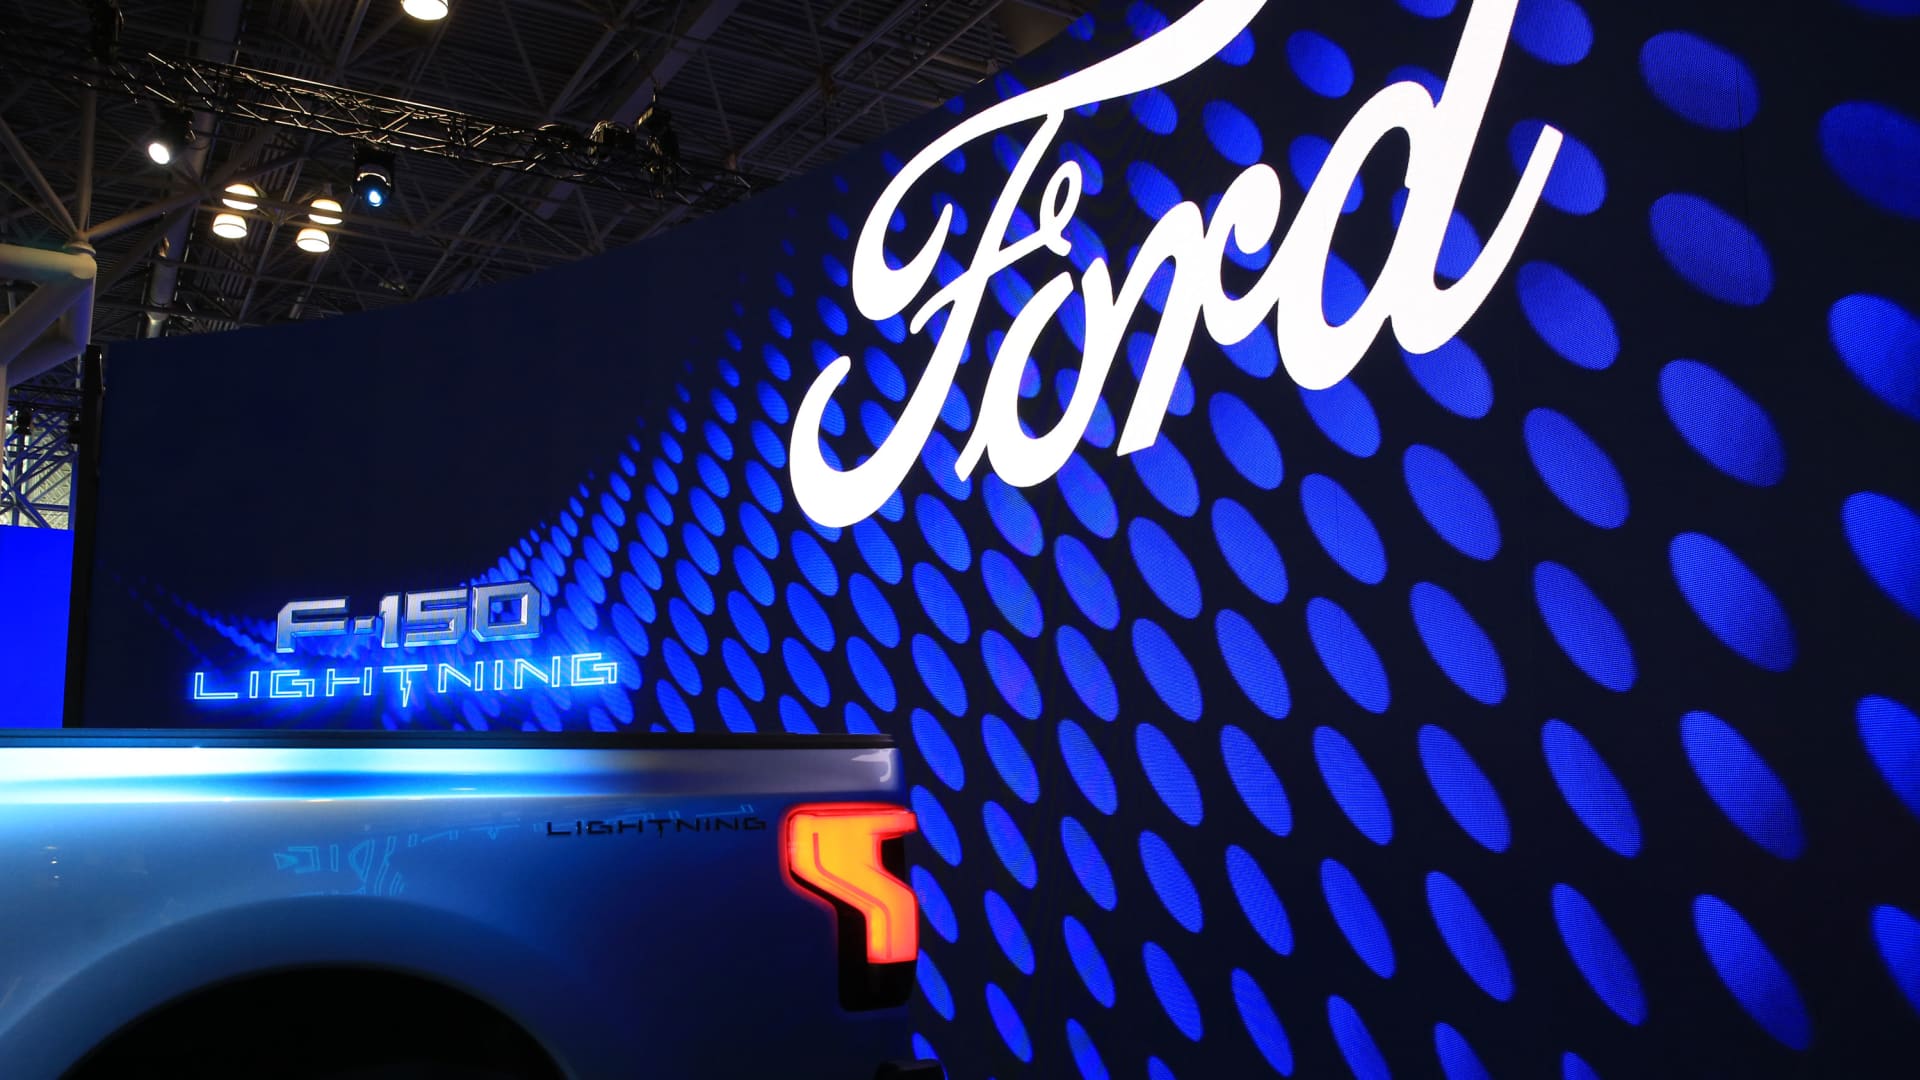 Deutsche Bank downgrades Ford, cites ugly fourth quarter and ‘aggressive’ 2023 guidance